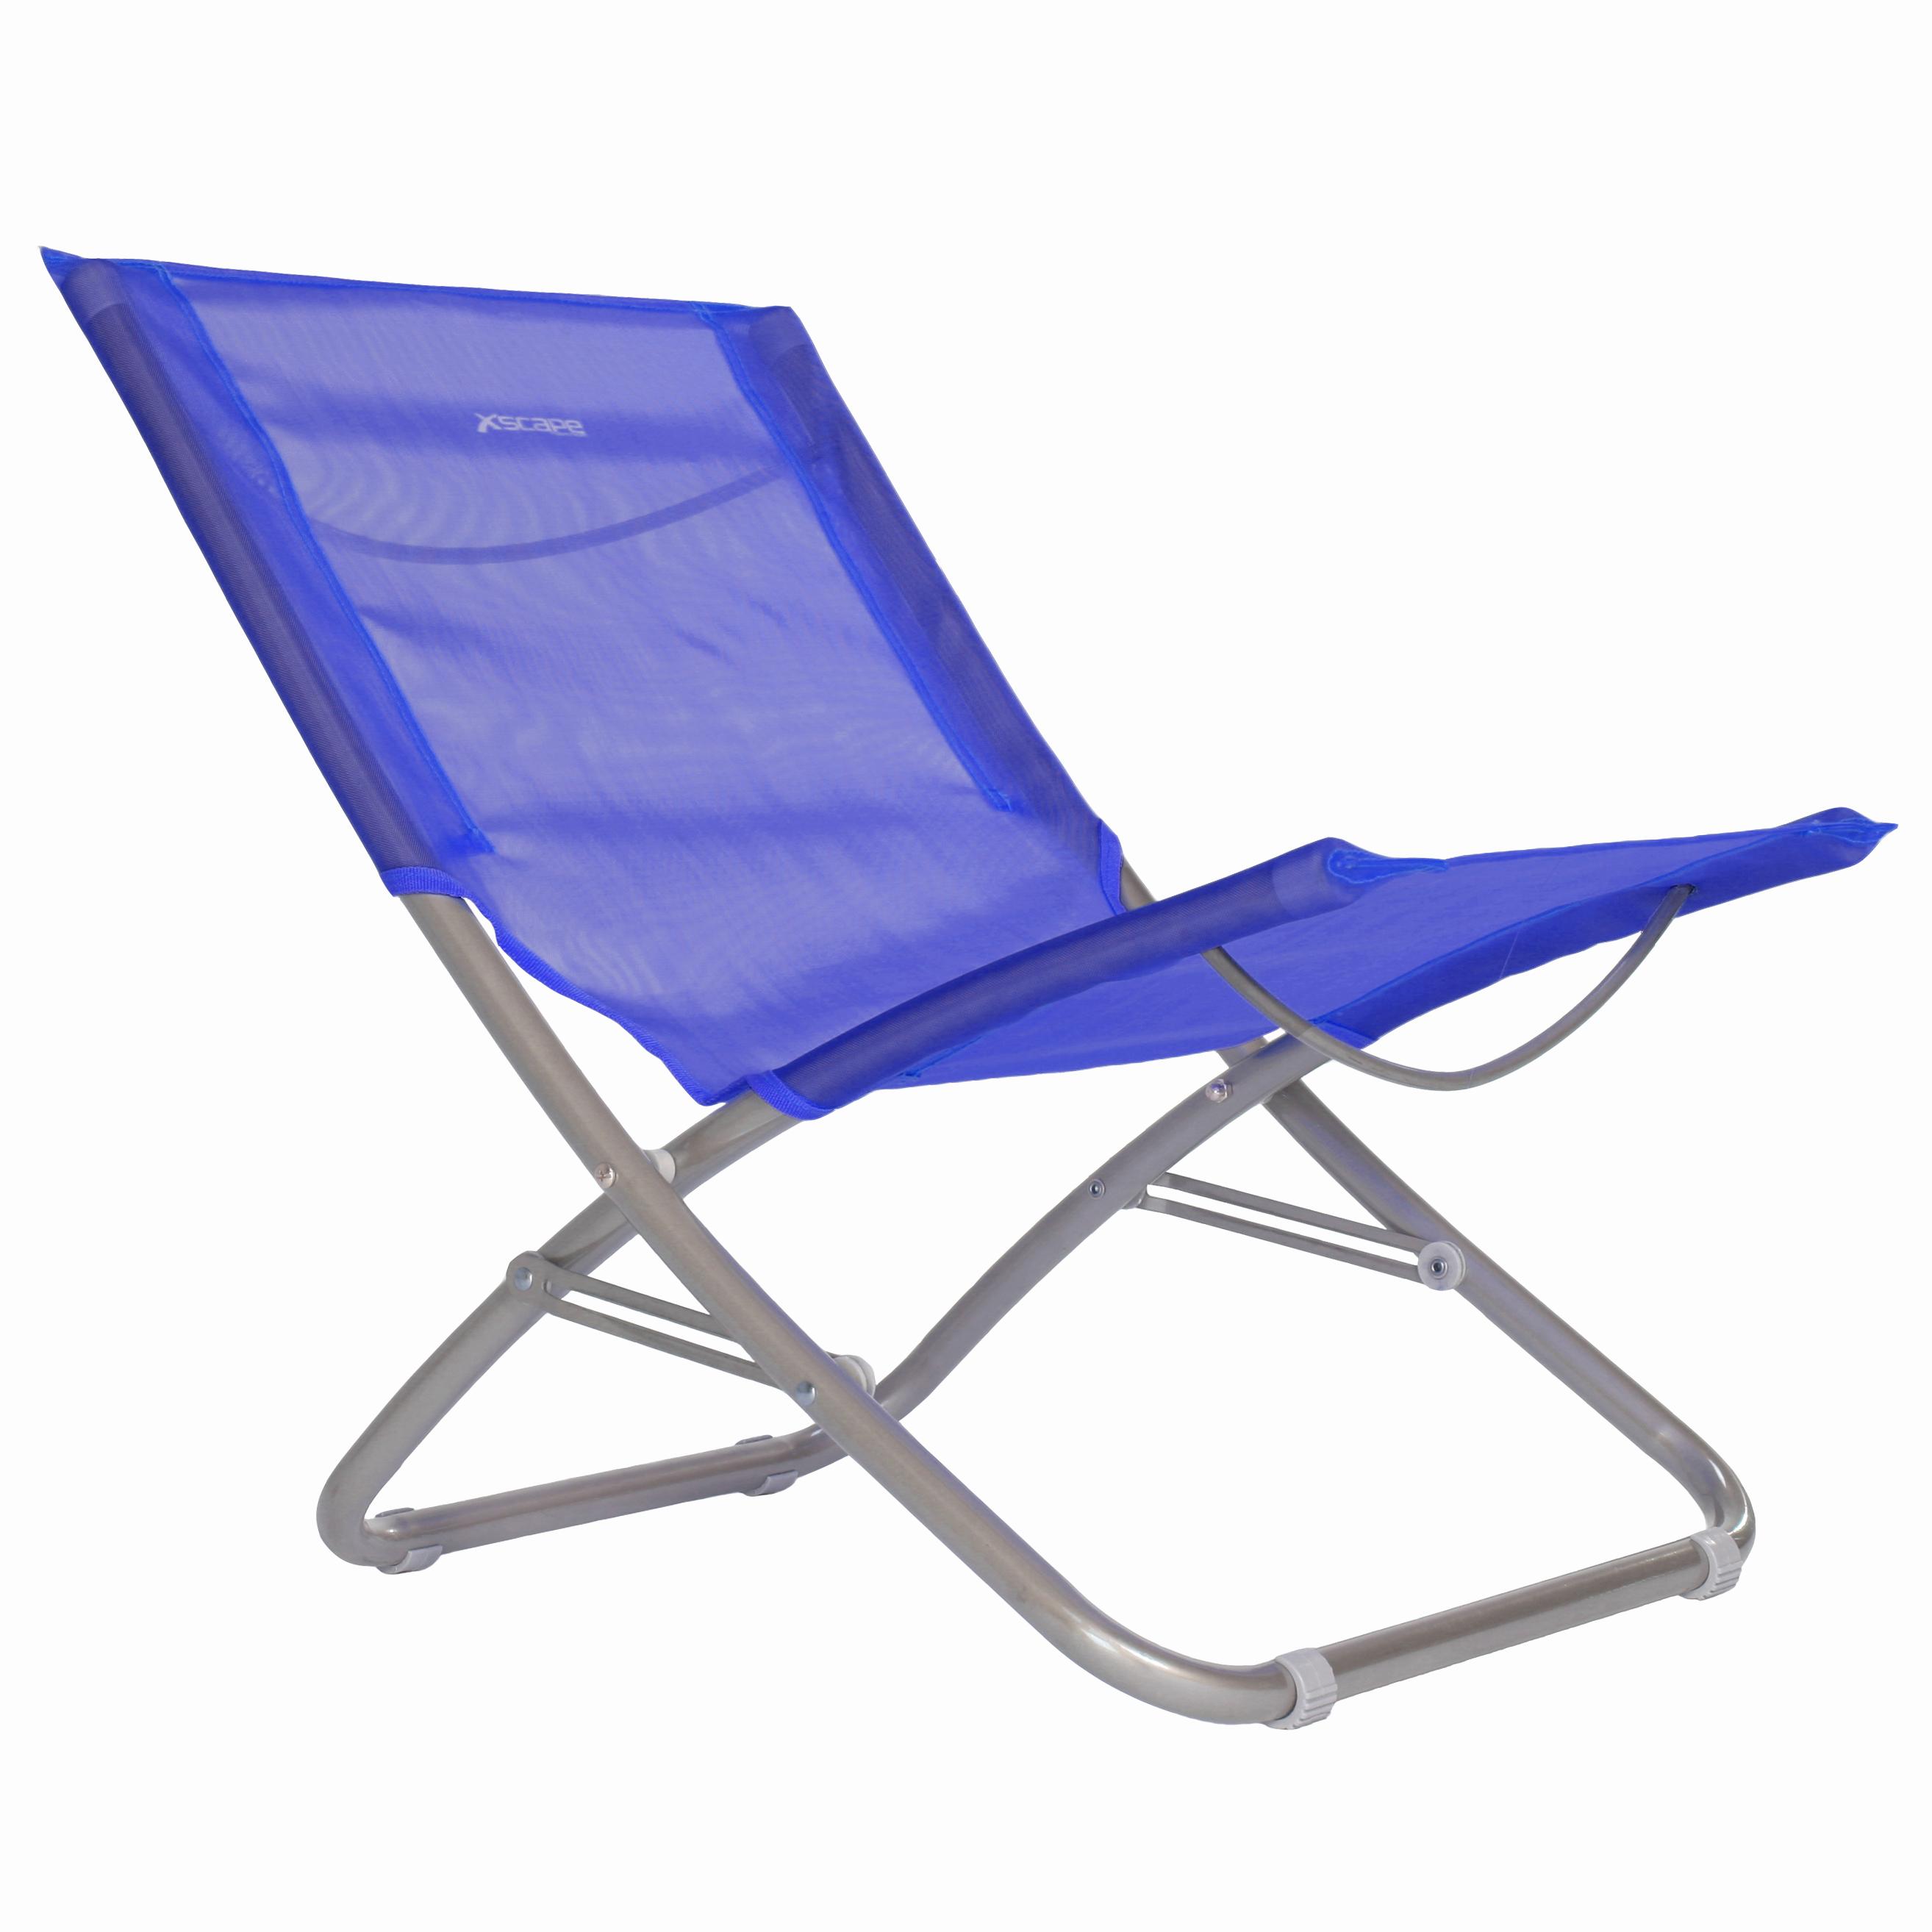 Free Beach Chair Download Free Beach Chair Png Images Free Cliparts On Clipart Library